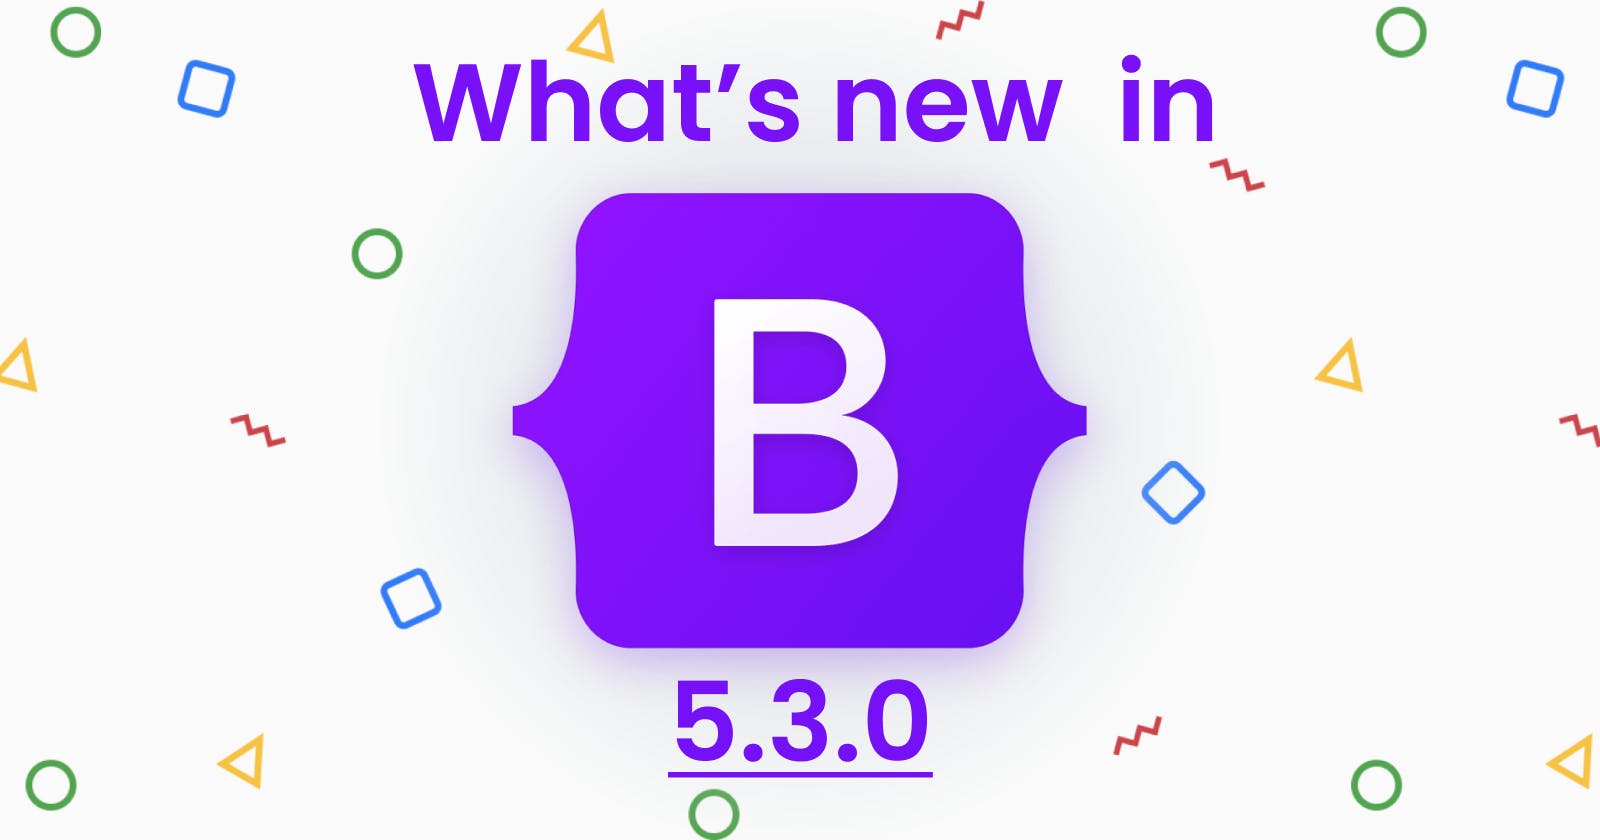 What's new in Bootstrap 5.3.0?